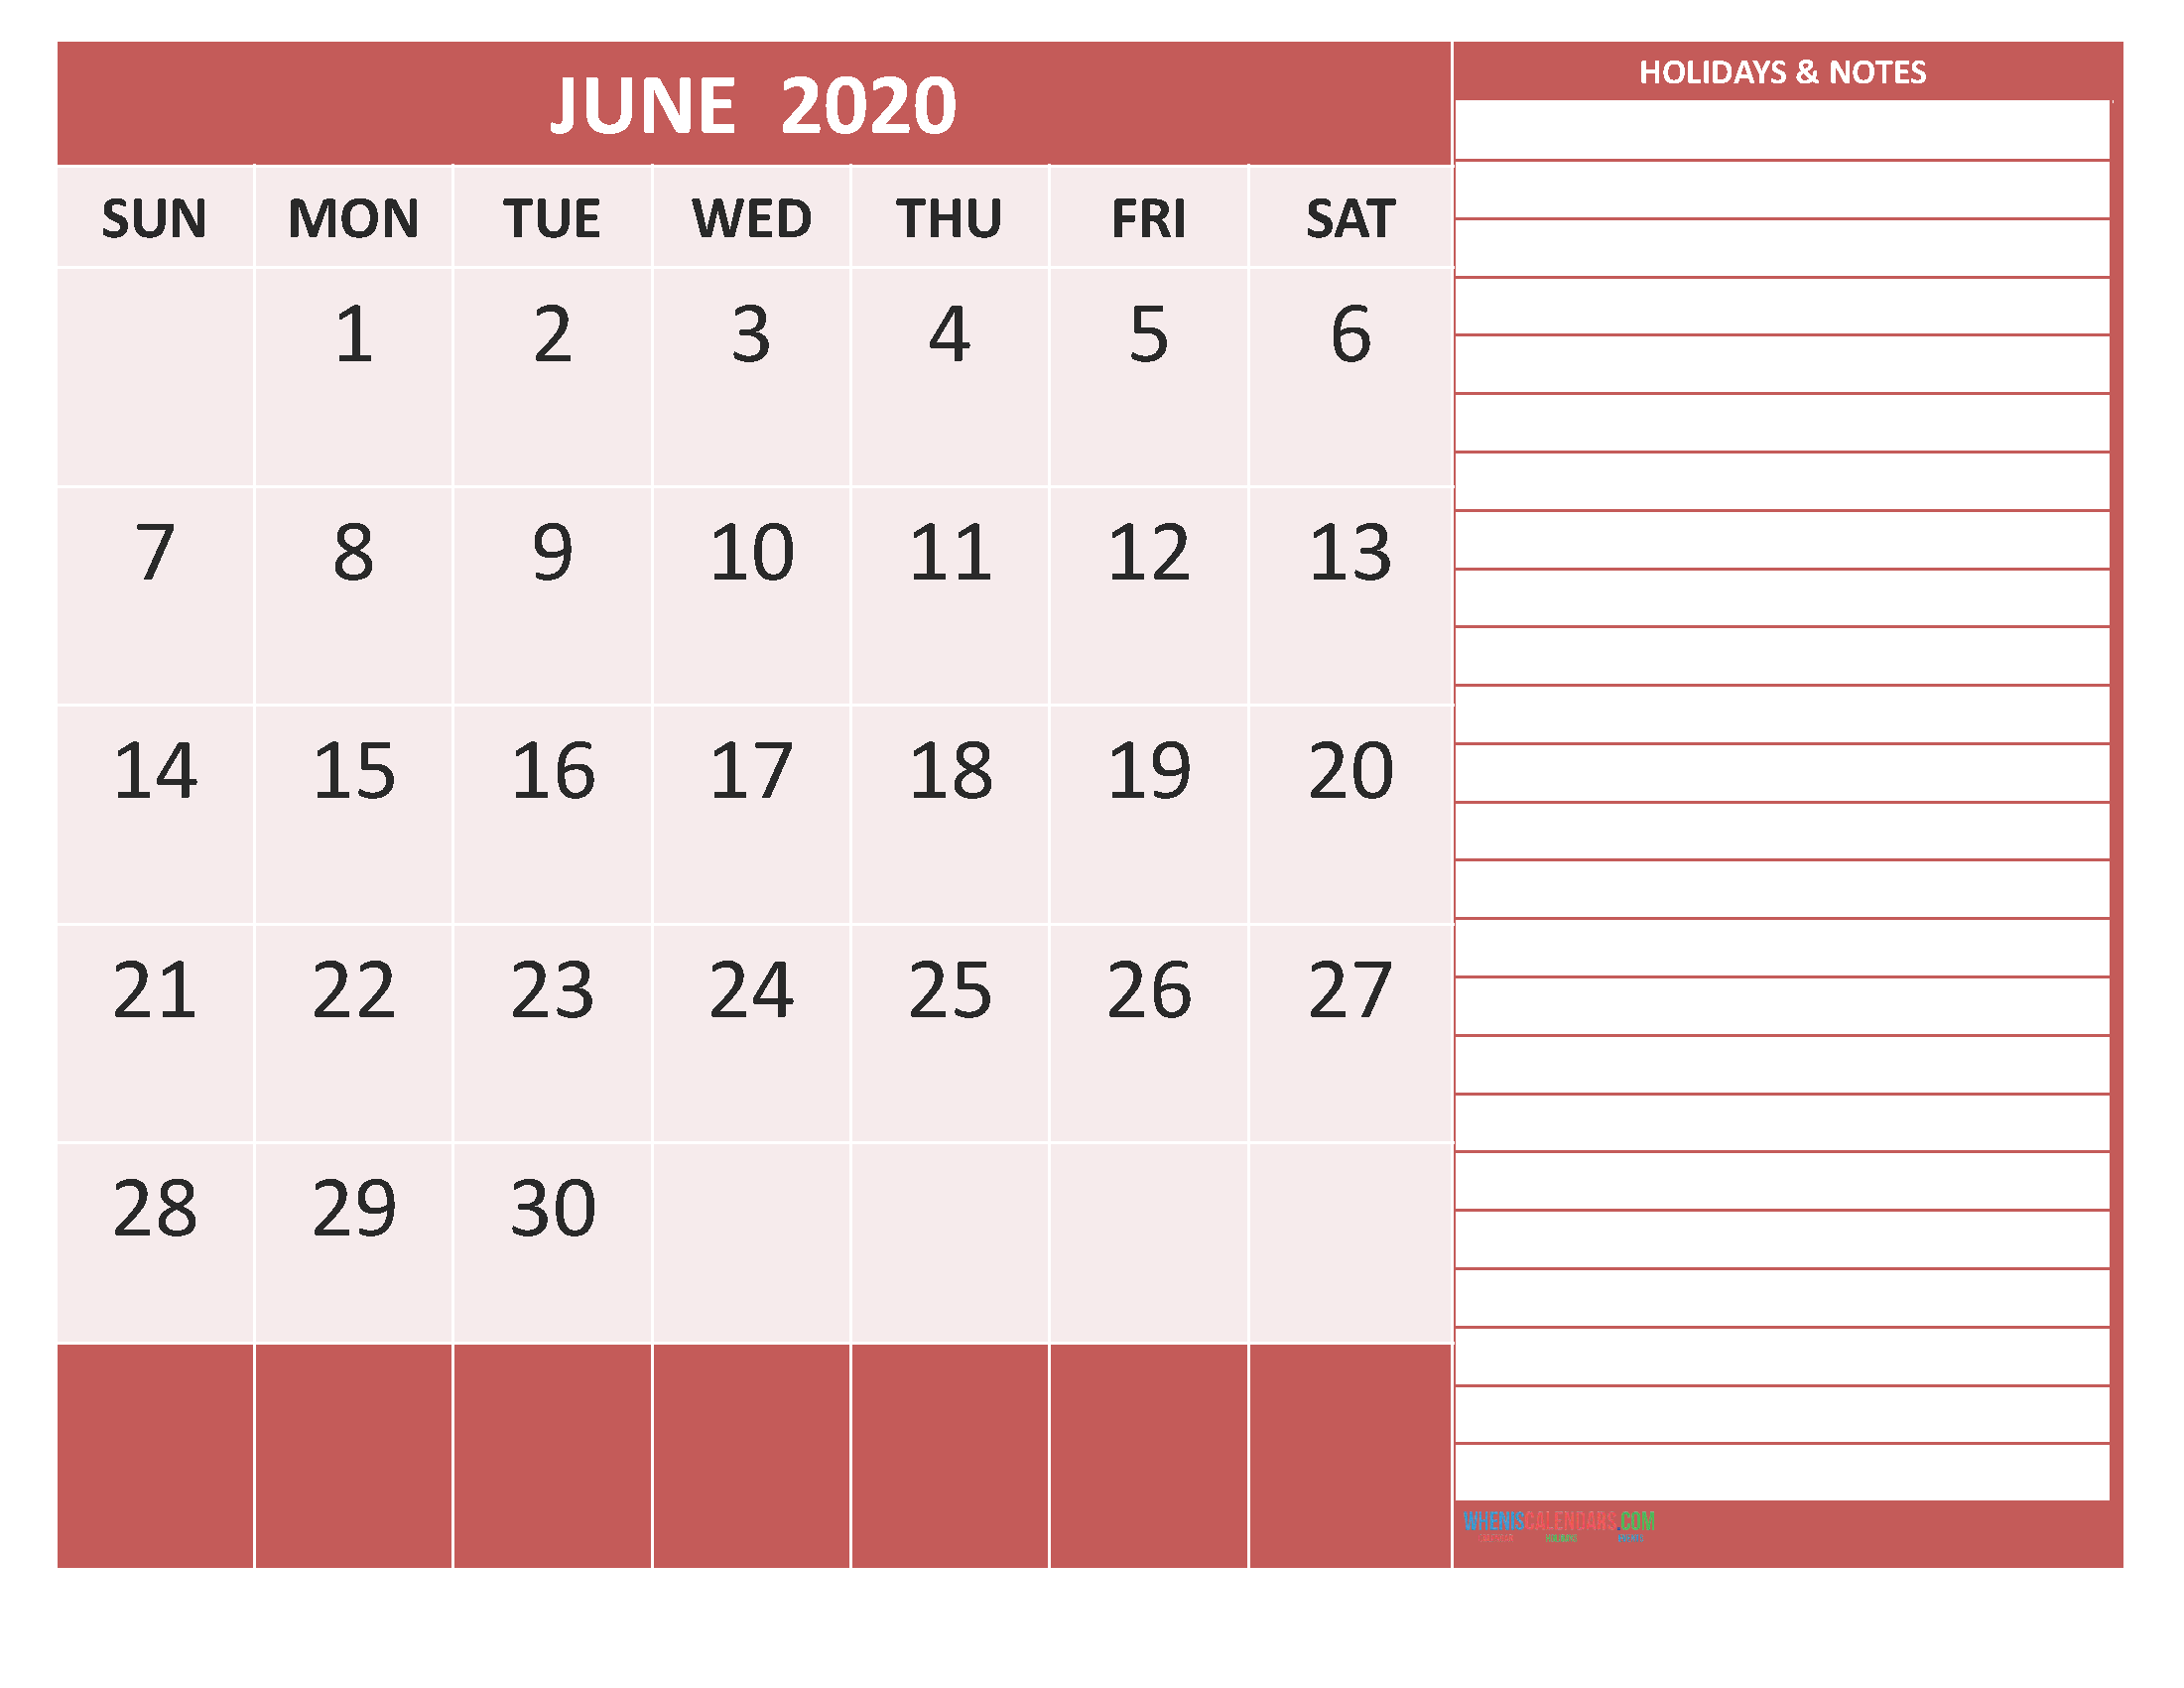 June 2020 Calendar with Holidays Free Printable by Word